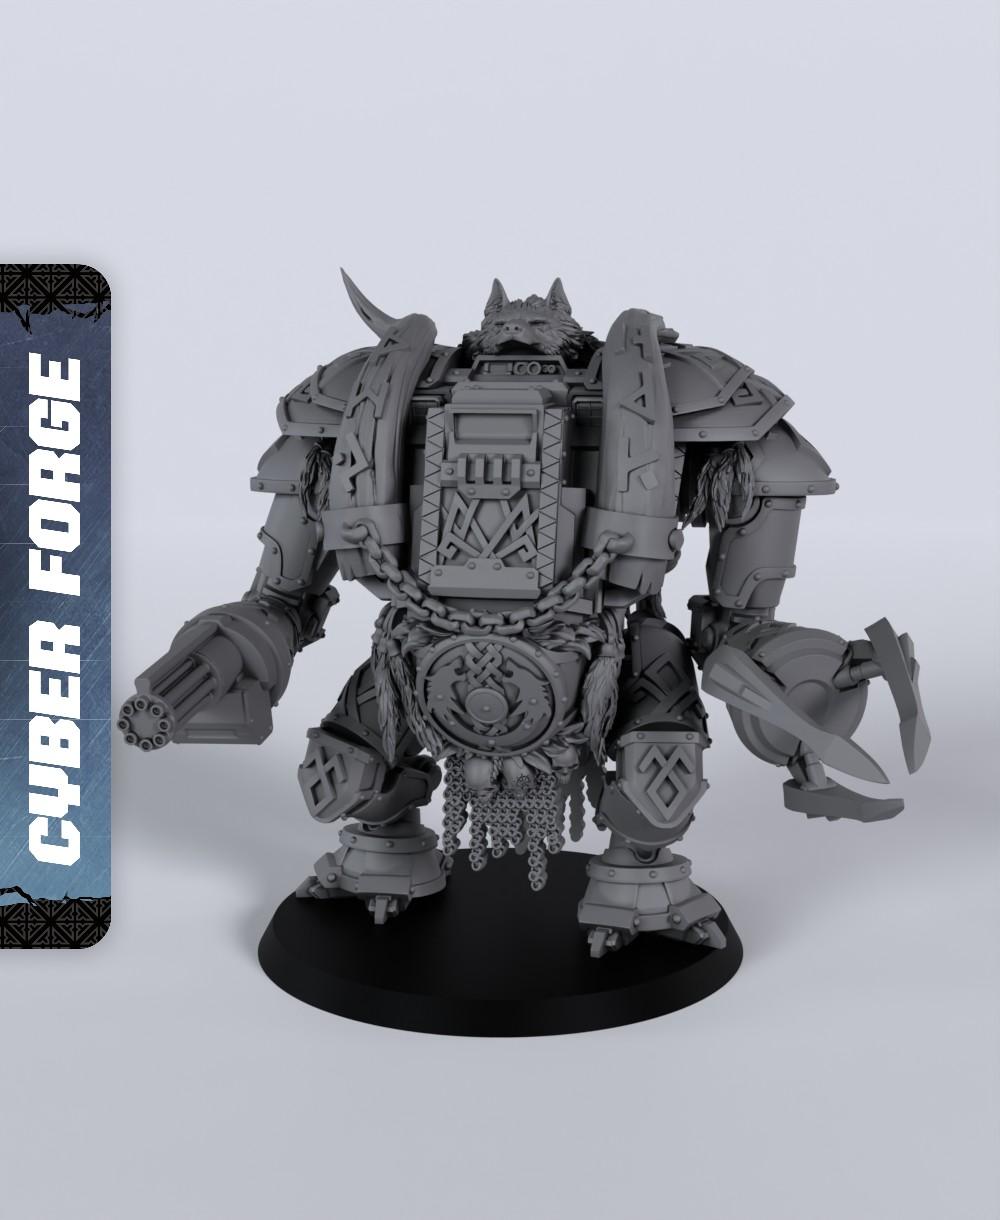 Njord the Eternal - With Free Cyberpunk Warhammer - 40k Sci-Fi Gift Ideas for RPG and Wargamers 3d model